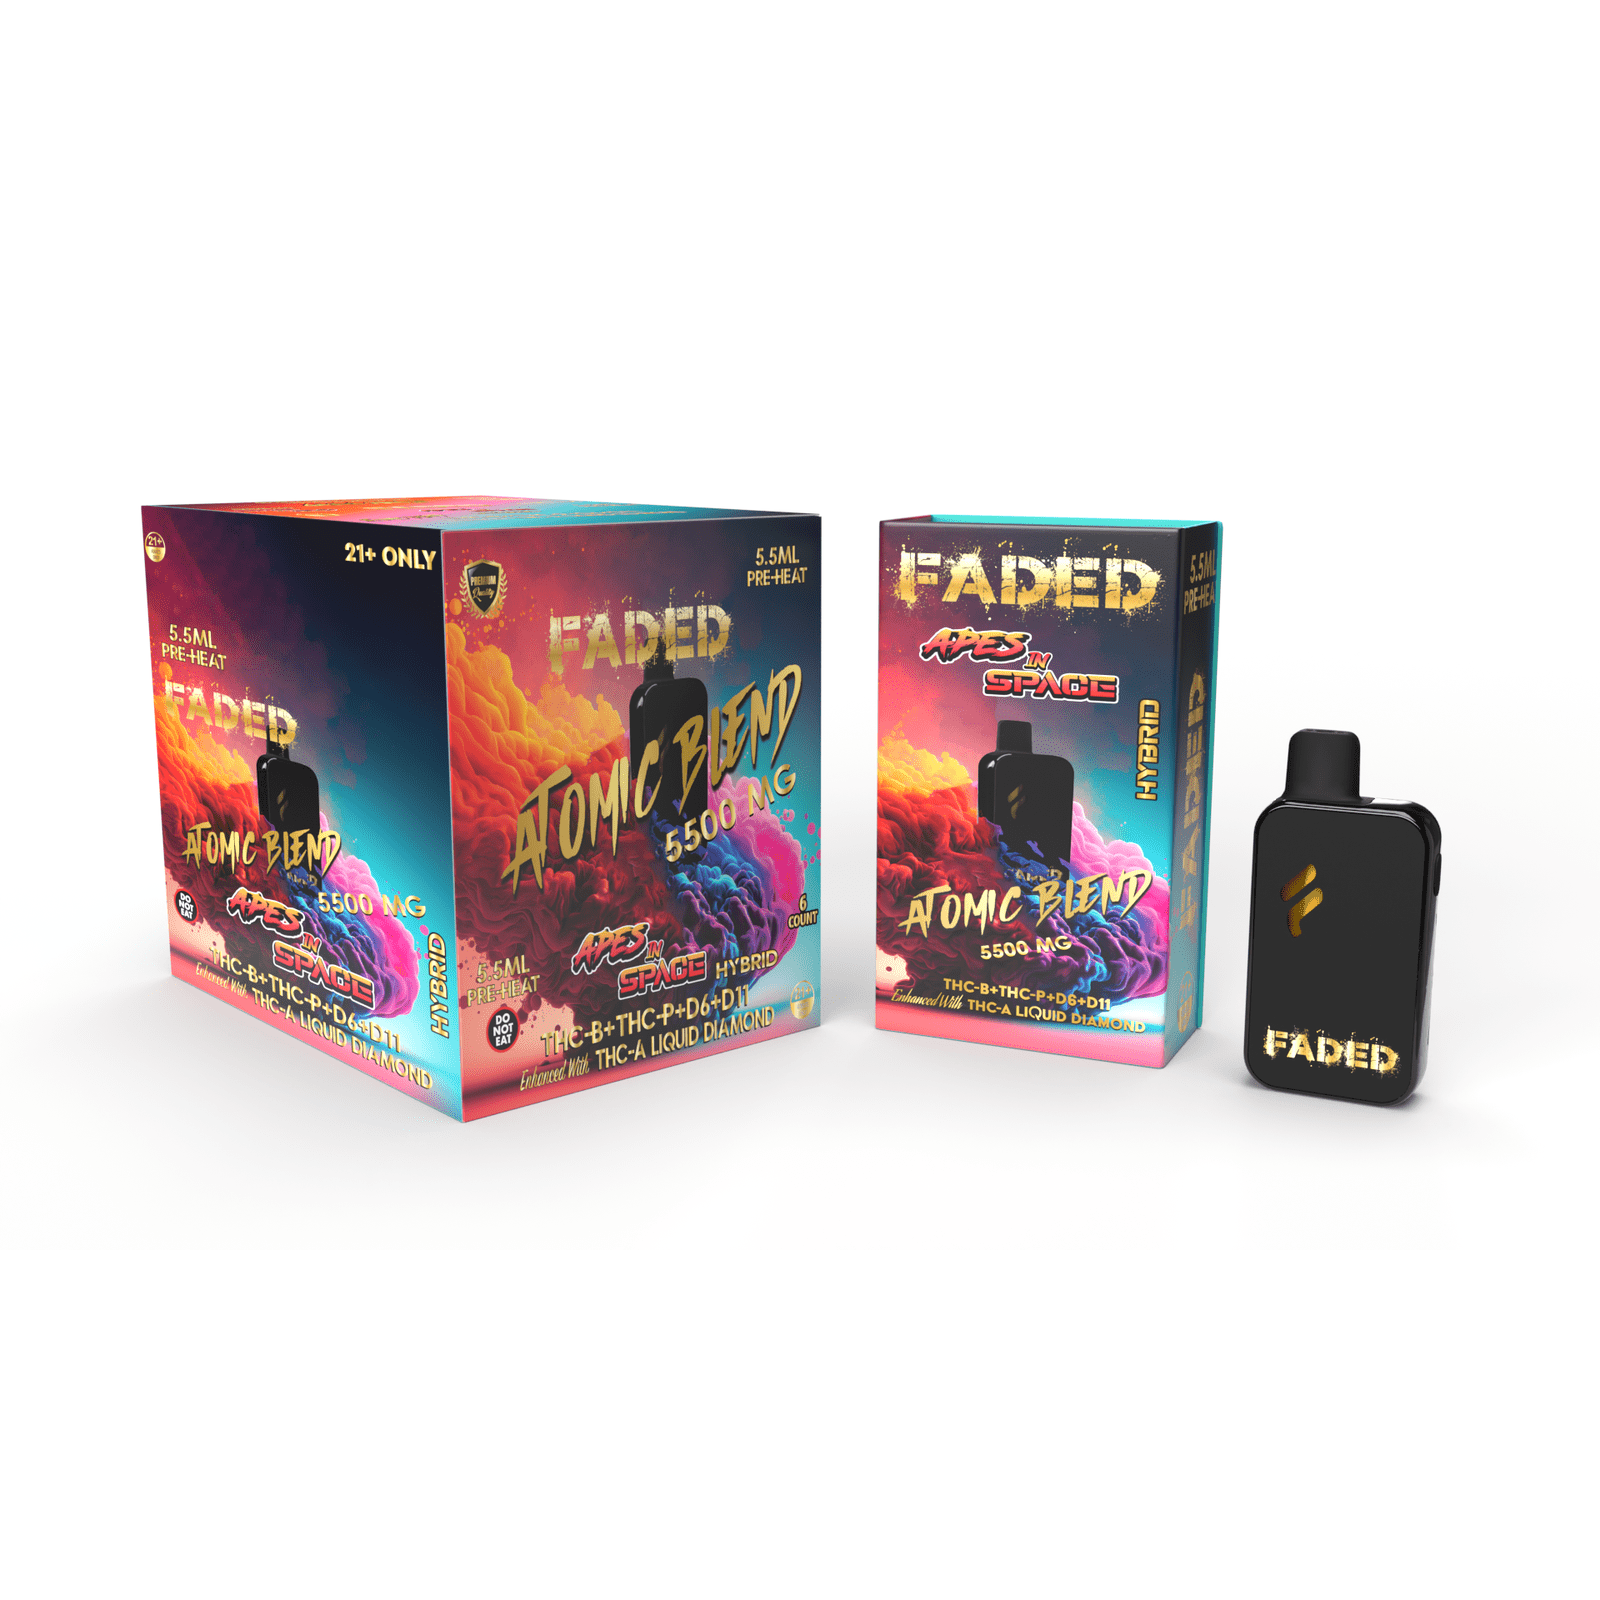 FADED THC-B+THC-P+D6+D11 ENHANCED WITH THC-A LIQUID DIAMOND RECHARGEABLE DISPOSABLE - HYBRID APES IN SPACE 5.5ML